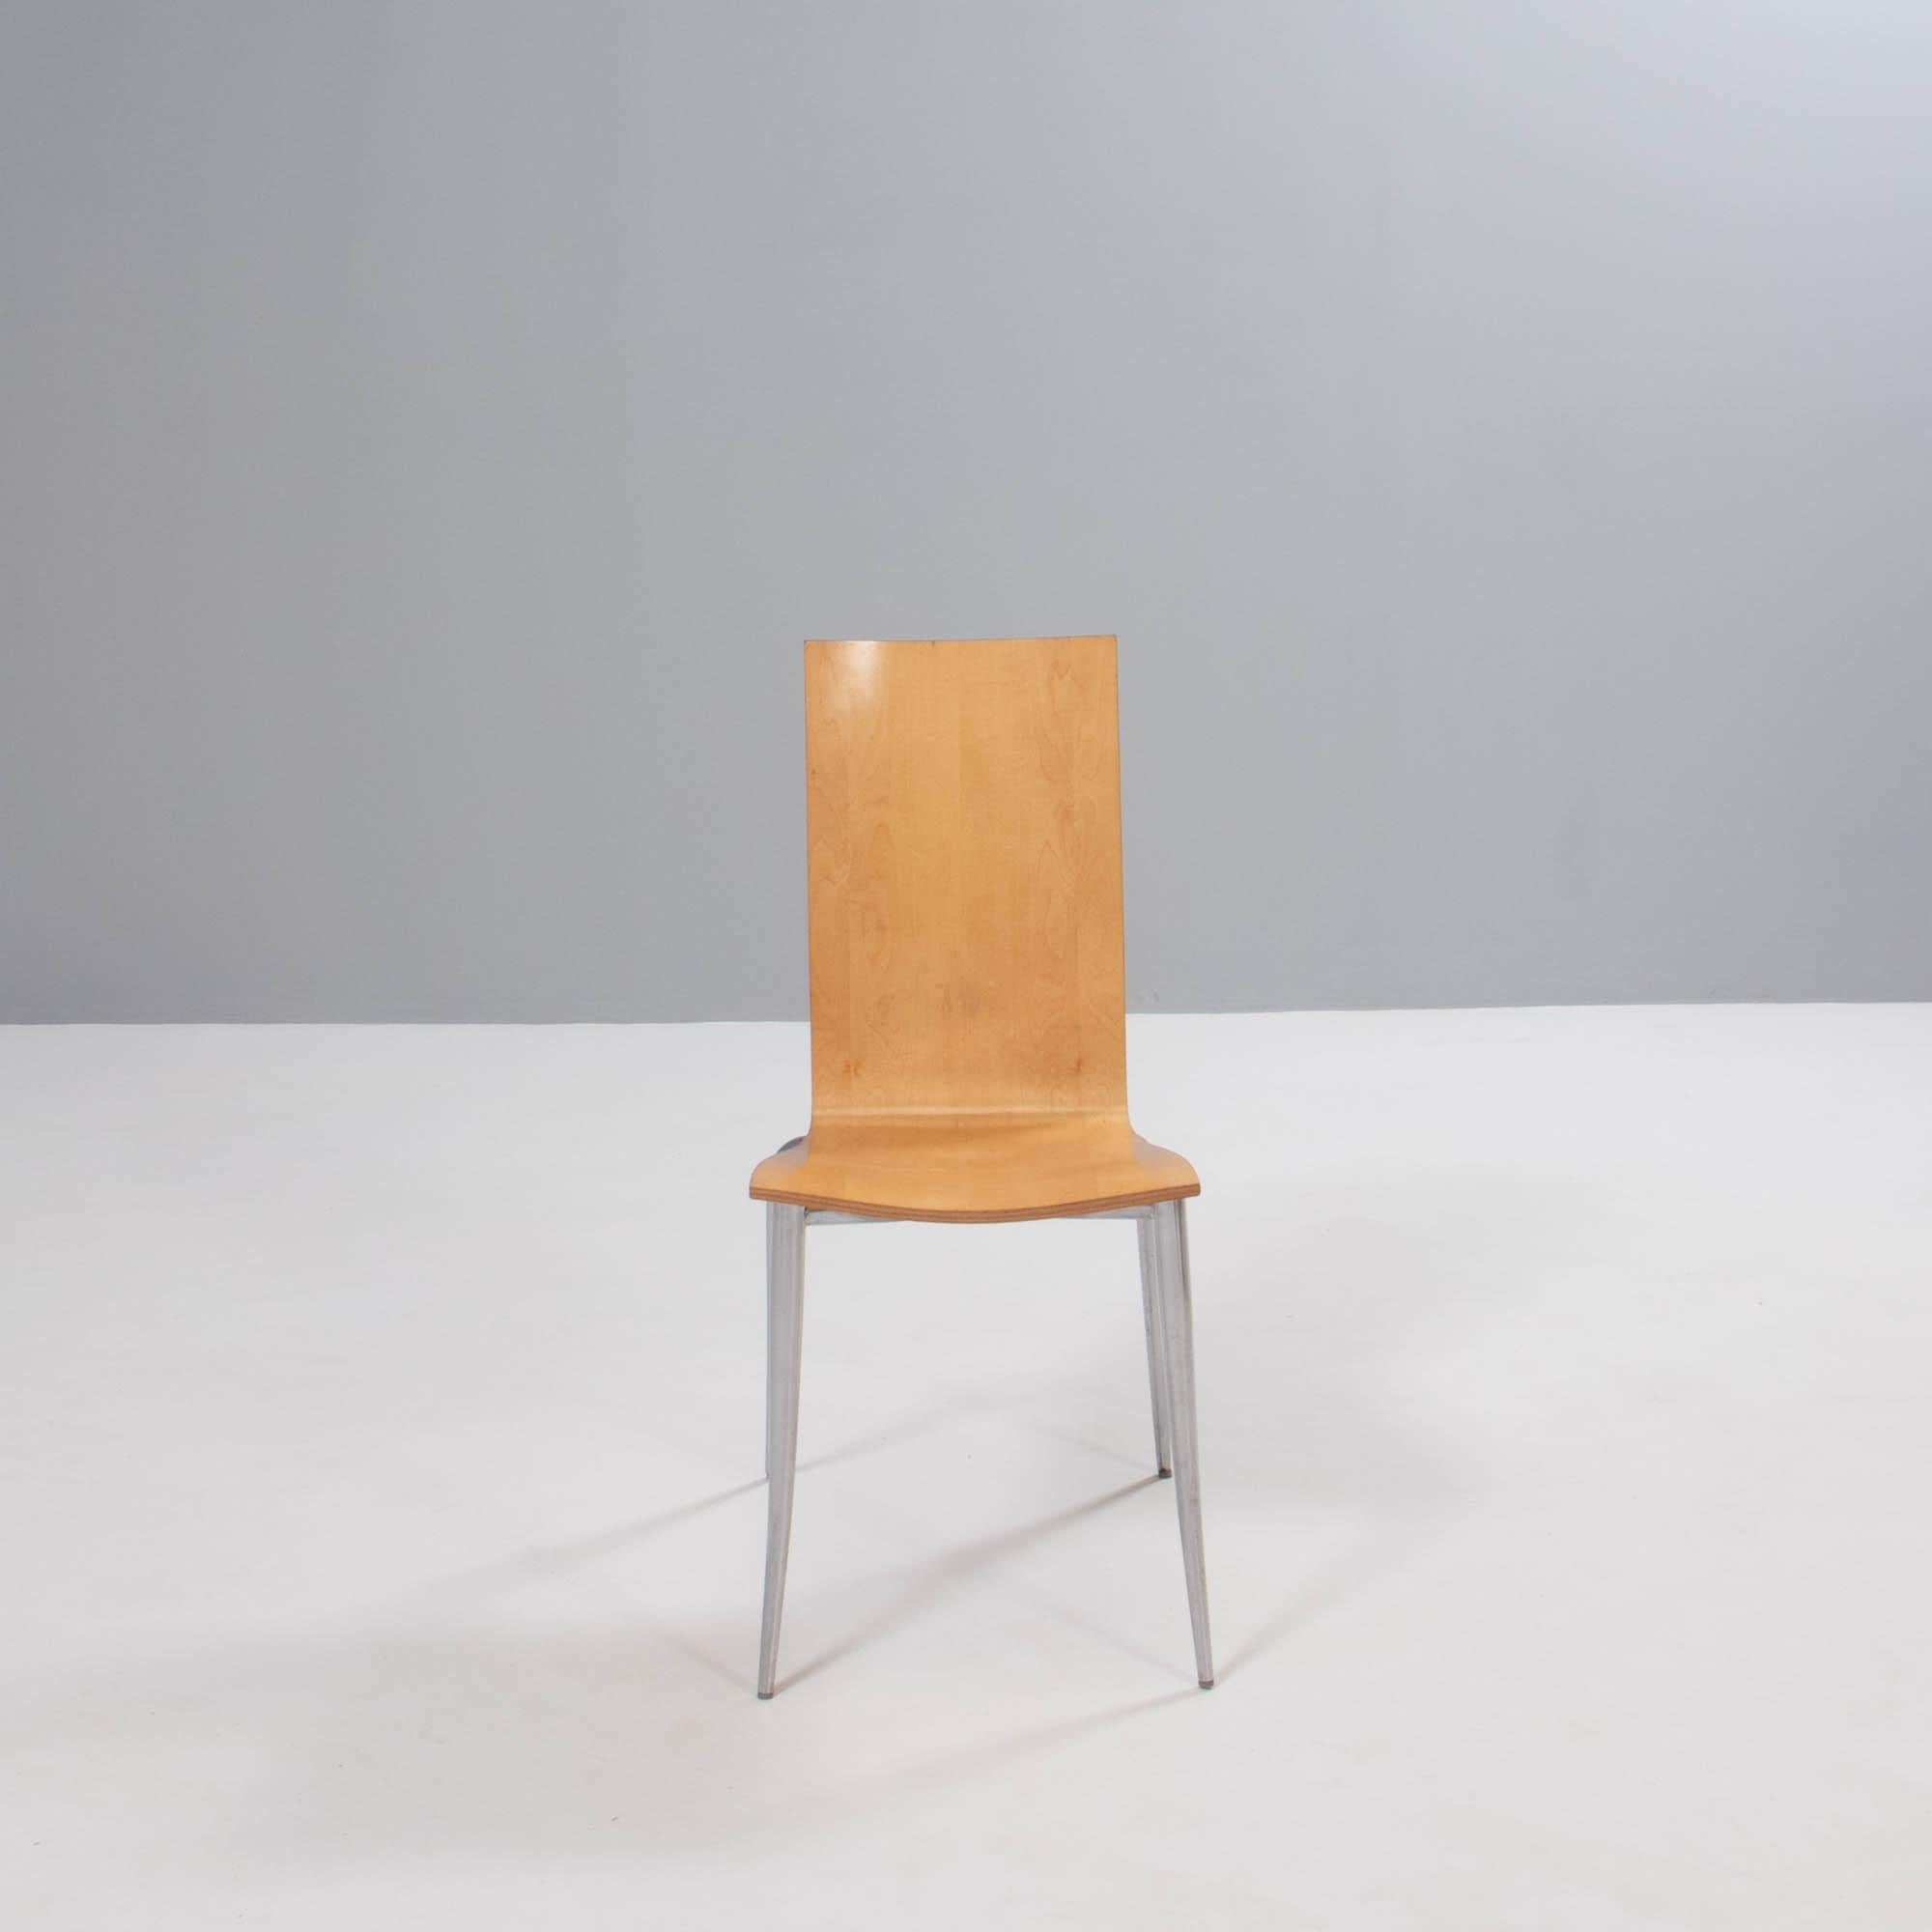 Designed by Philippe Starck for Driade, the Olly Tango dining chairs are a fantastic example of post-modernist design.

Constructed from plywood, the seats combine soft curves with sleek straight lines and sit on chromed tubular steel legs that